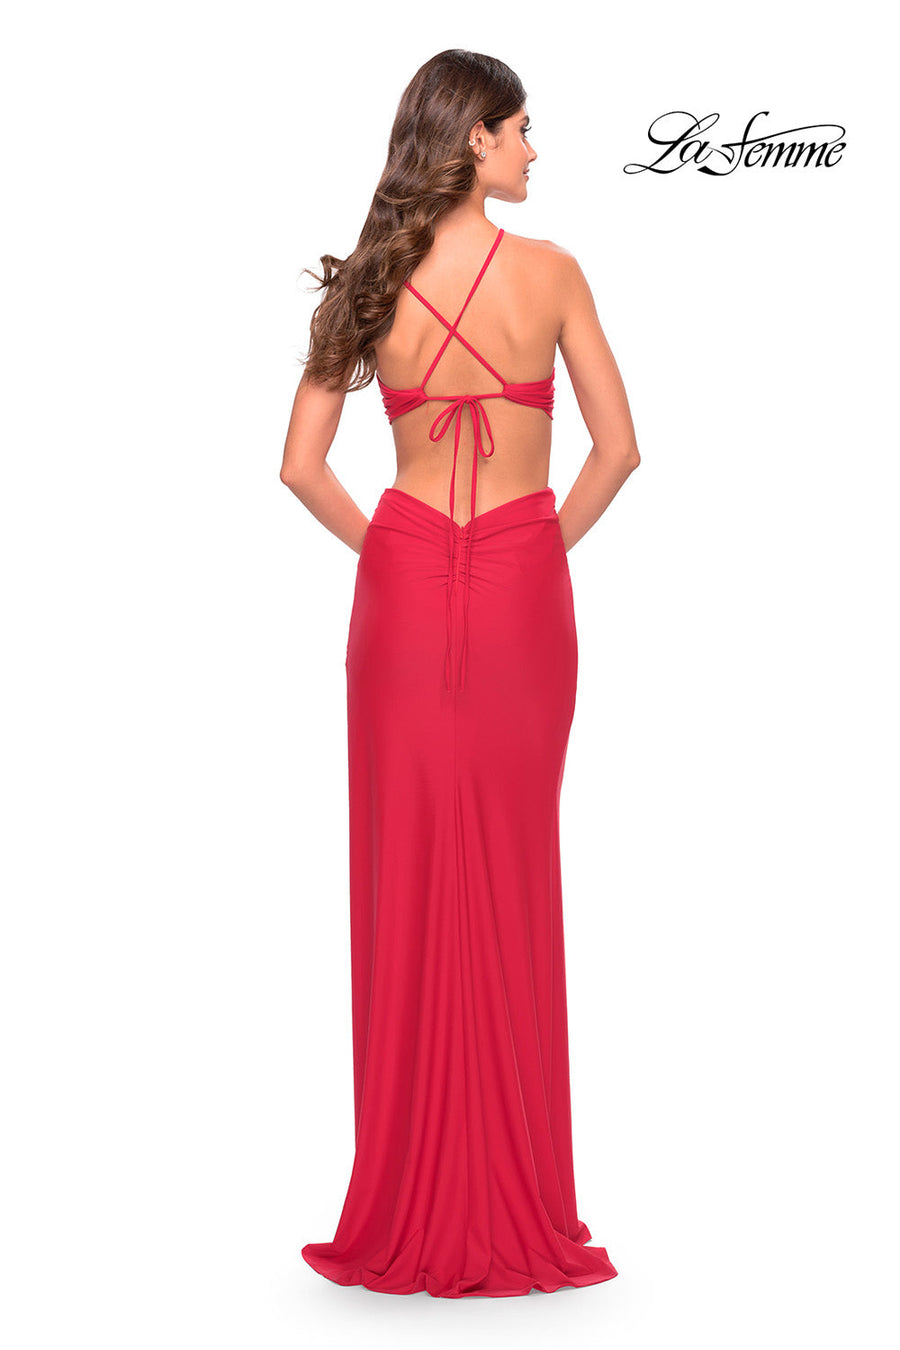 La Femme 31293 prom dress images.  La Femme 31293 is available in these colors: Black, Red.